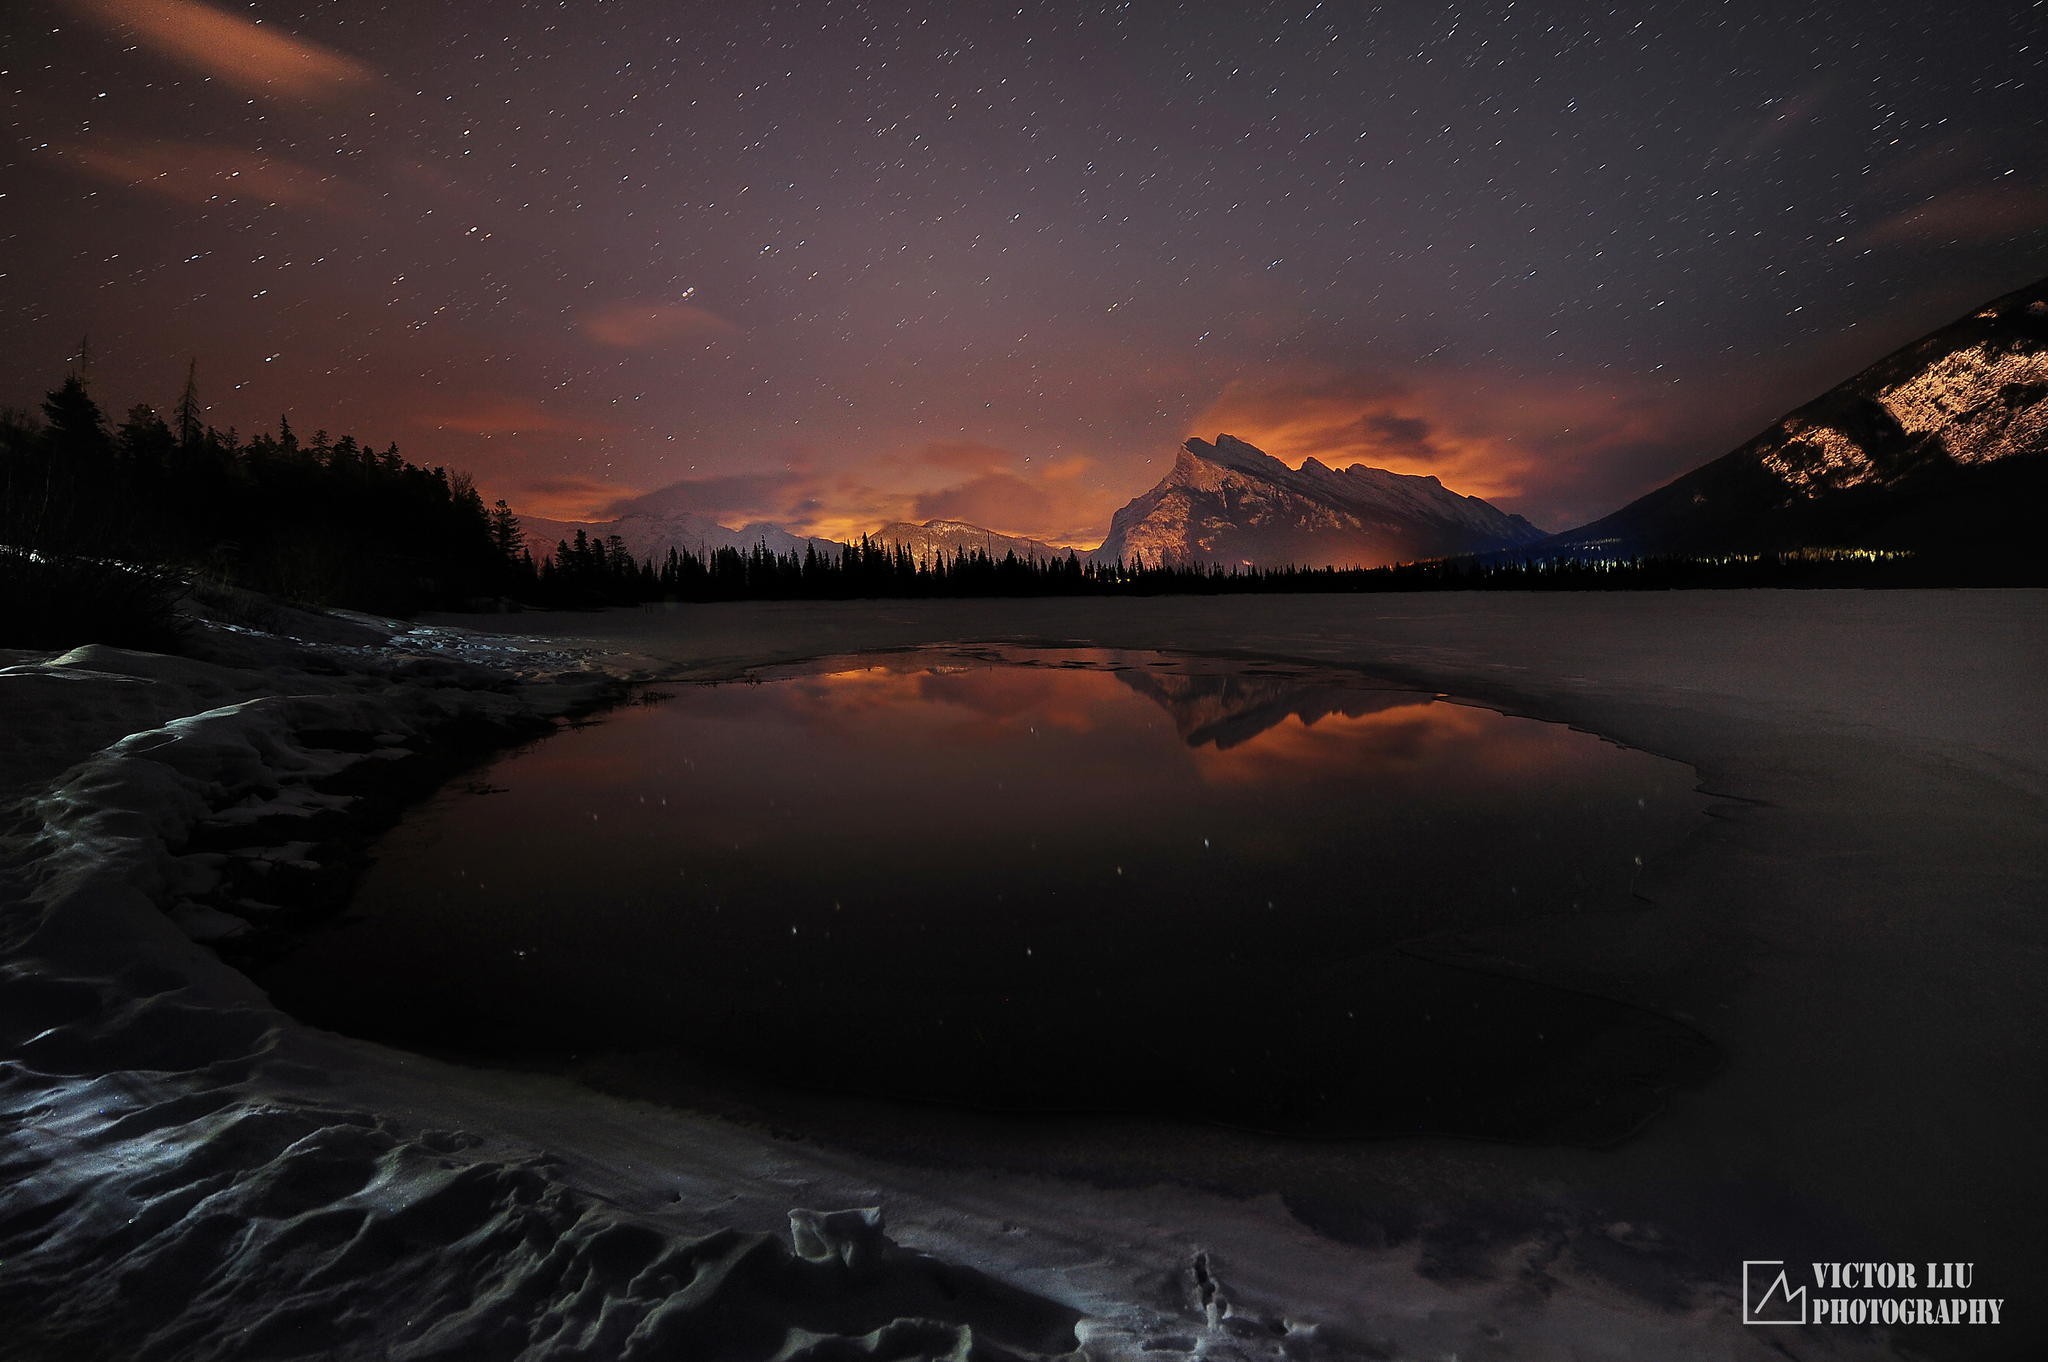 General 2048x1362 landscape nature sky dark mountains reflection stars winter cold outdoors watermarked low light Mount Rundle Banff National Park Canada